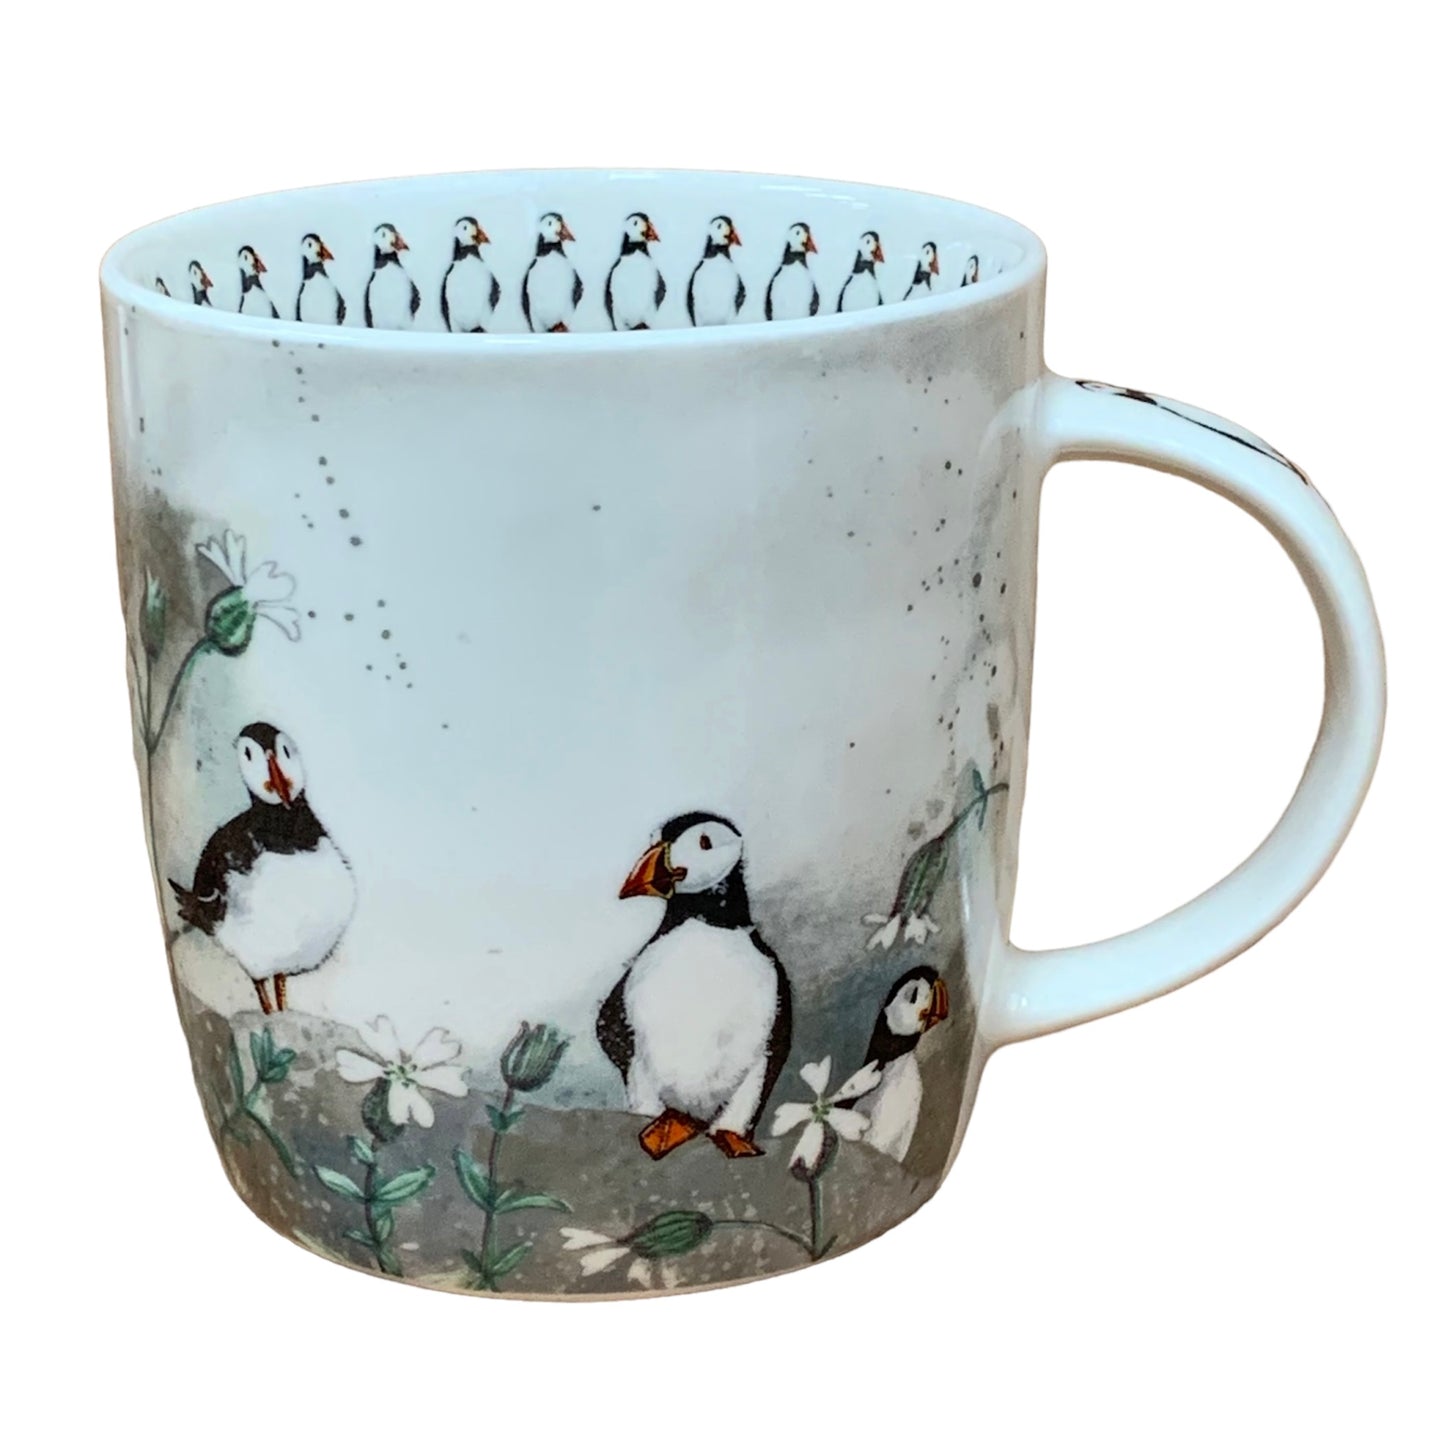 This Alex Clark mug is illustrated with lovely Puffins in their natural environment.  This mug also features an illustration of puffins around the inside rim & illustrations down the handle. 